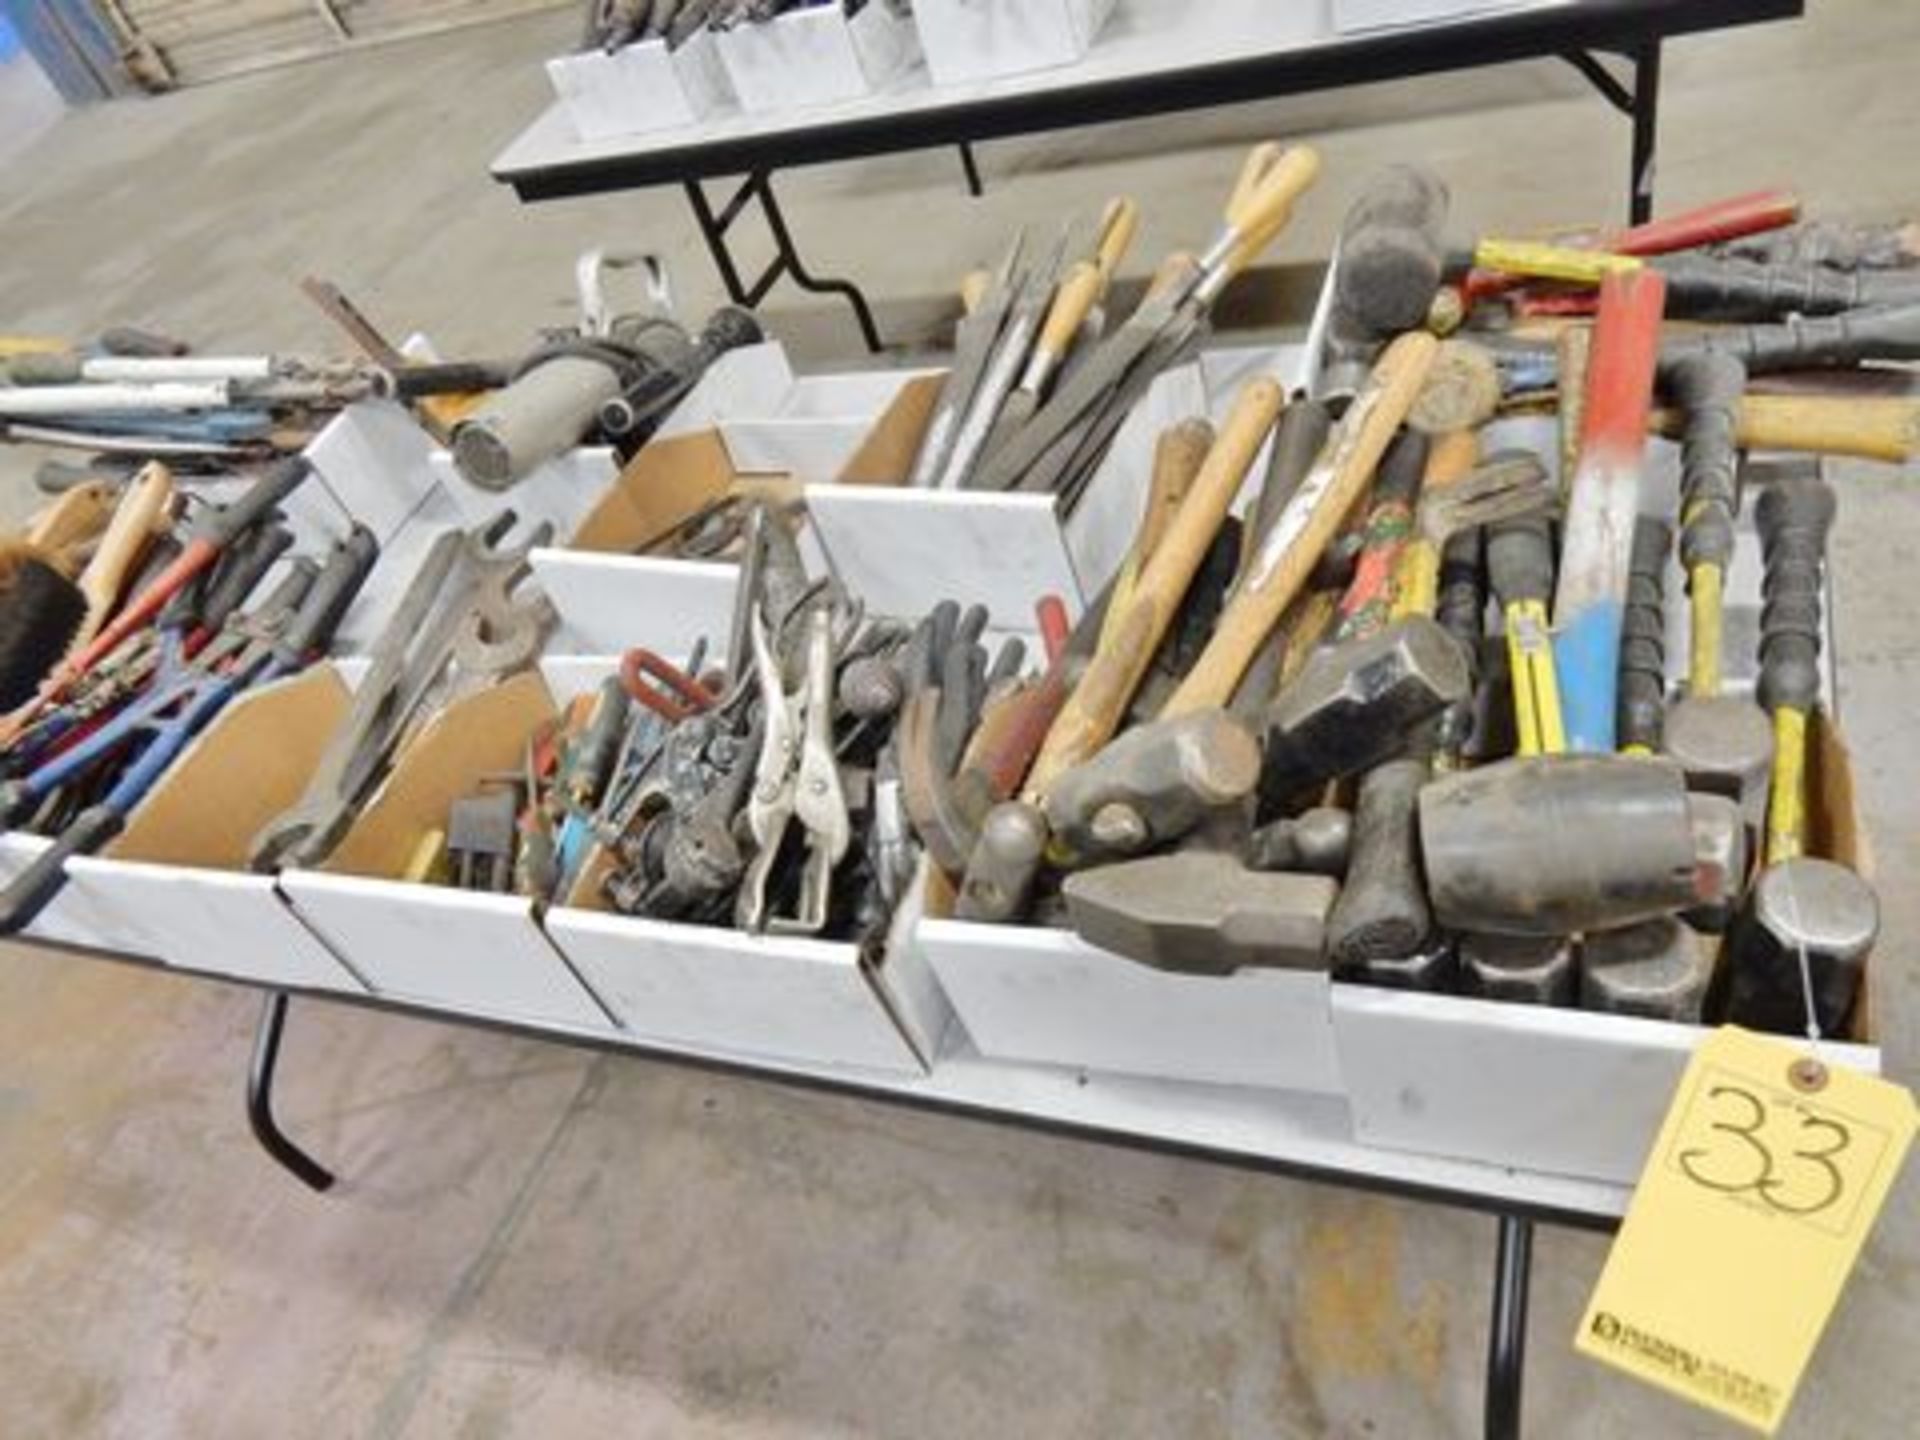 LOT HAMMERS, FILES, WRENCHES, SCREW DRIVERS, ETC.